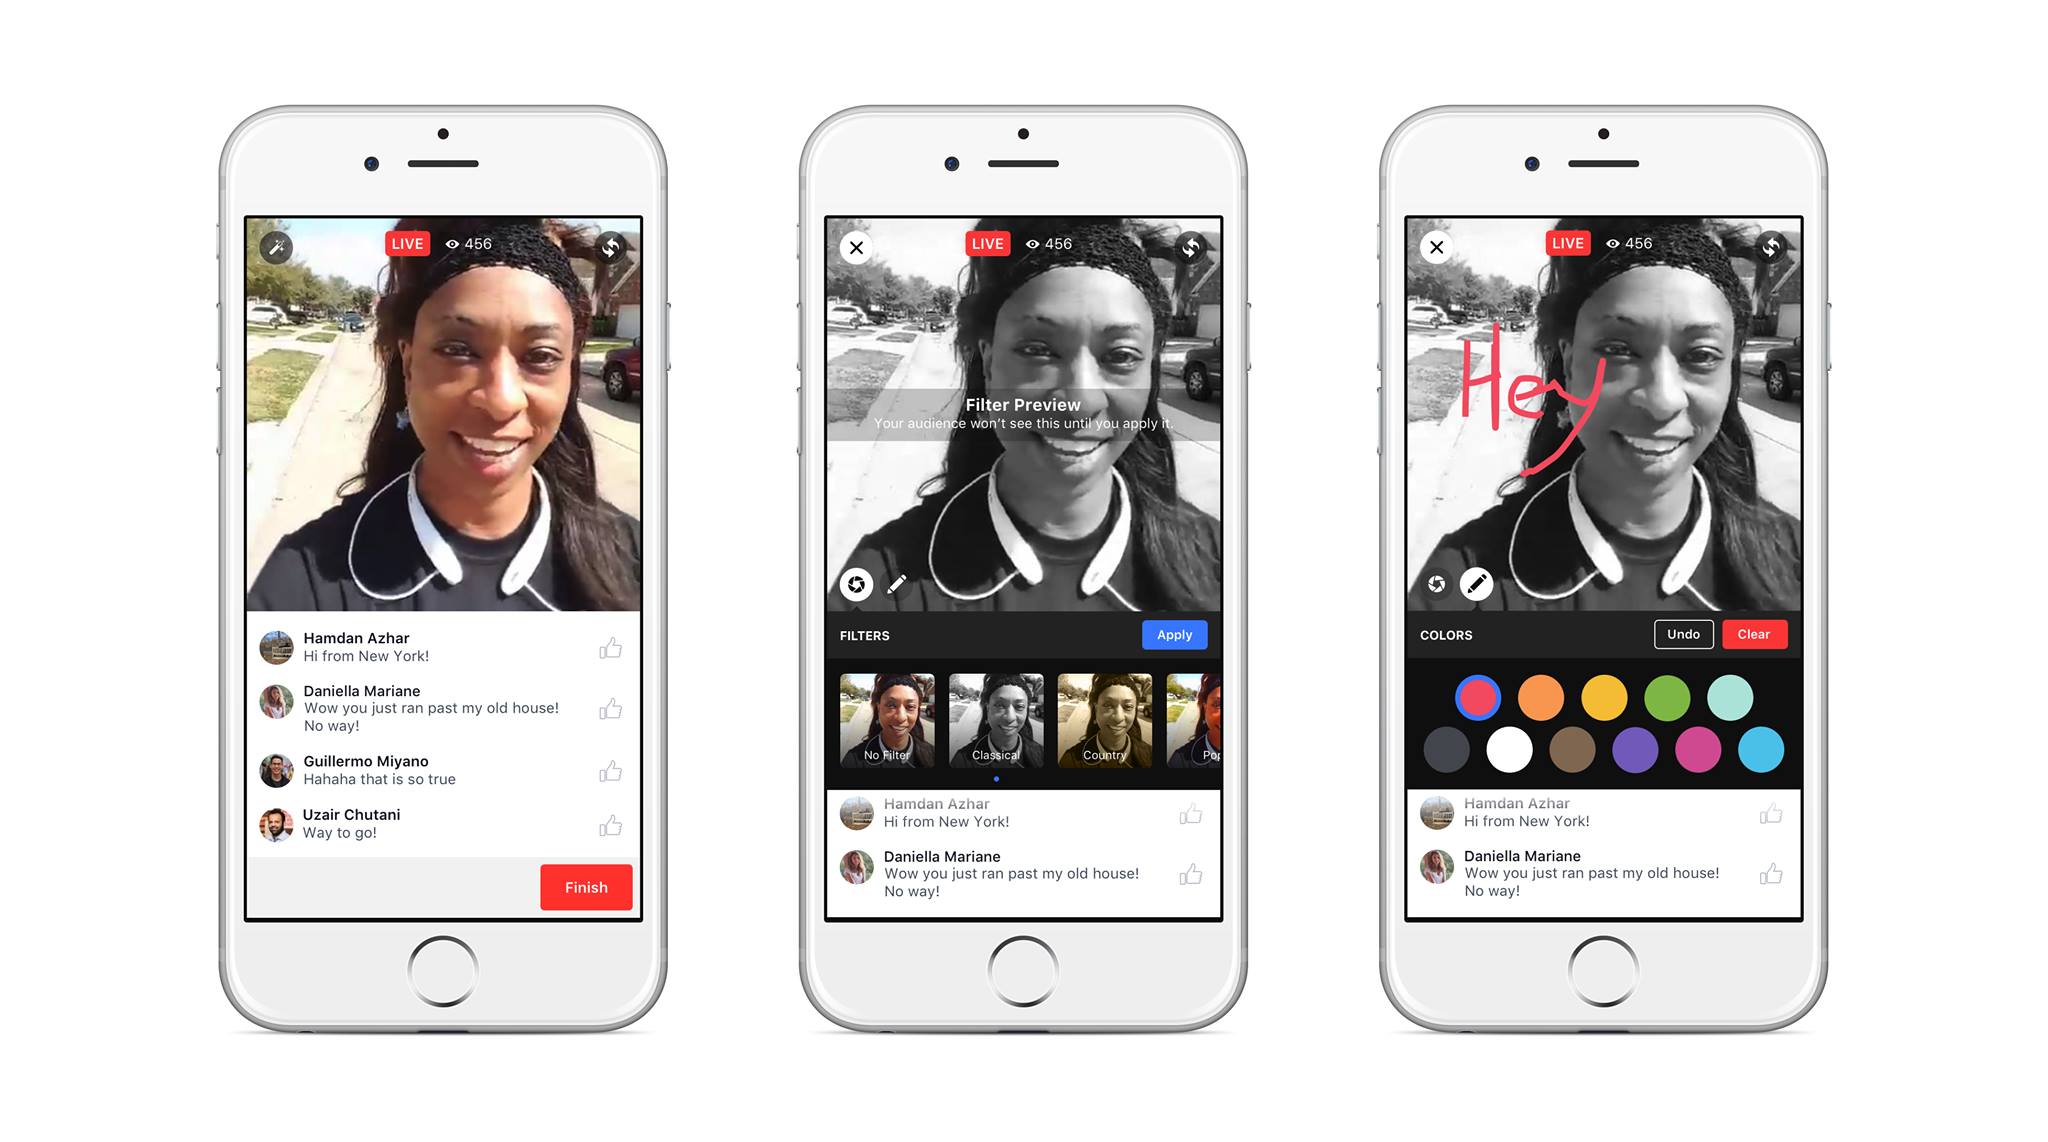 Facebook's creative tools: filters and doodling while livestreaming